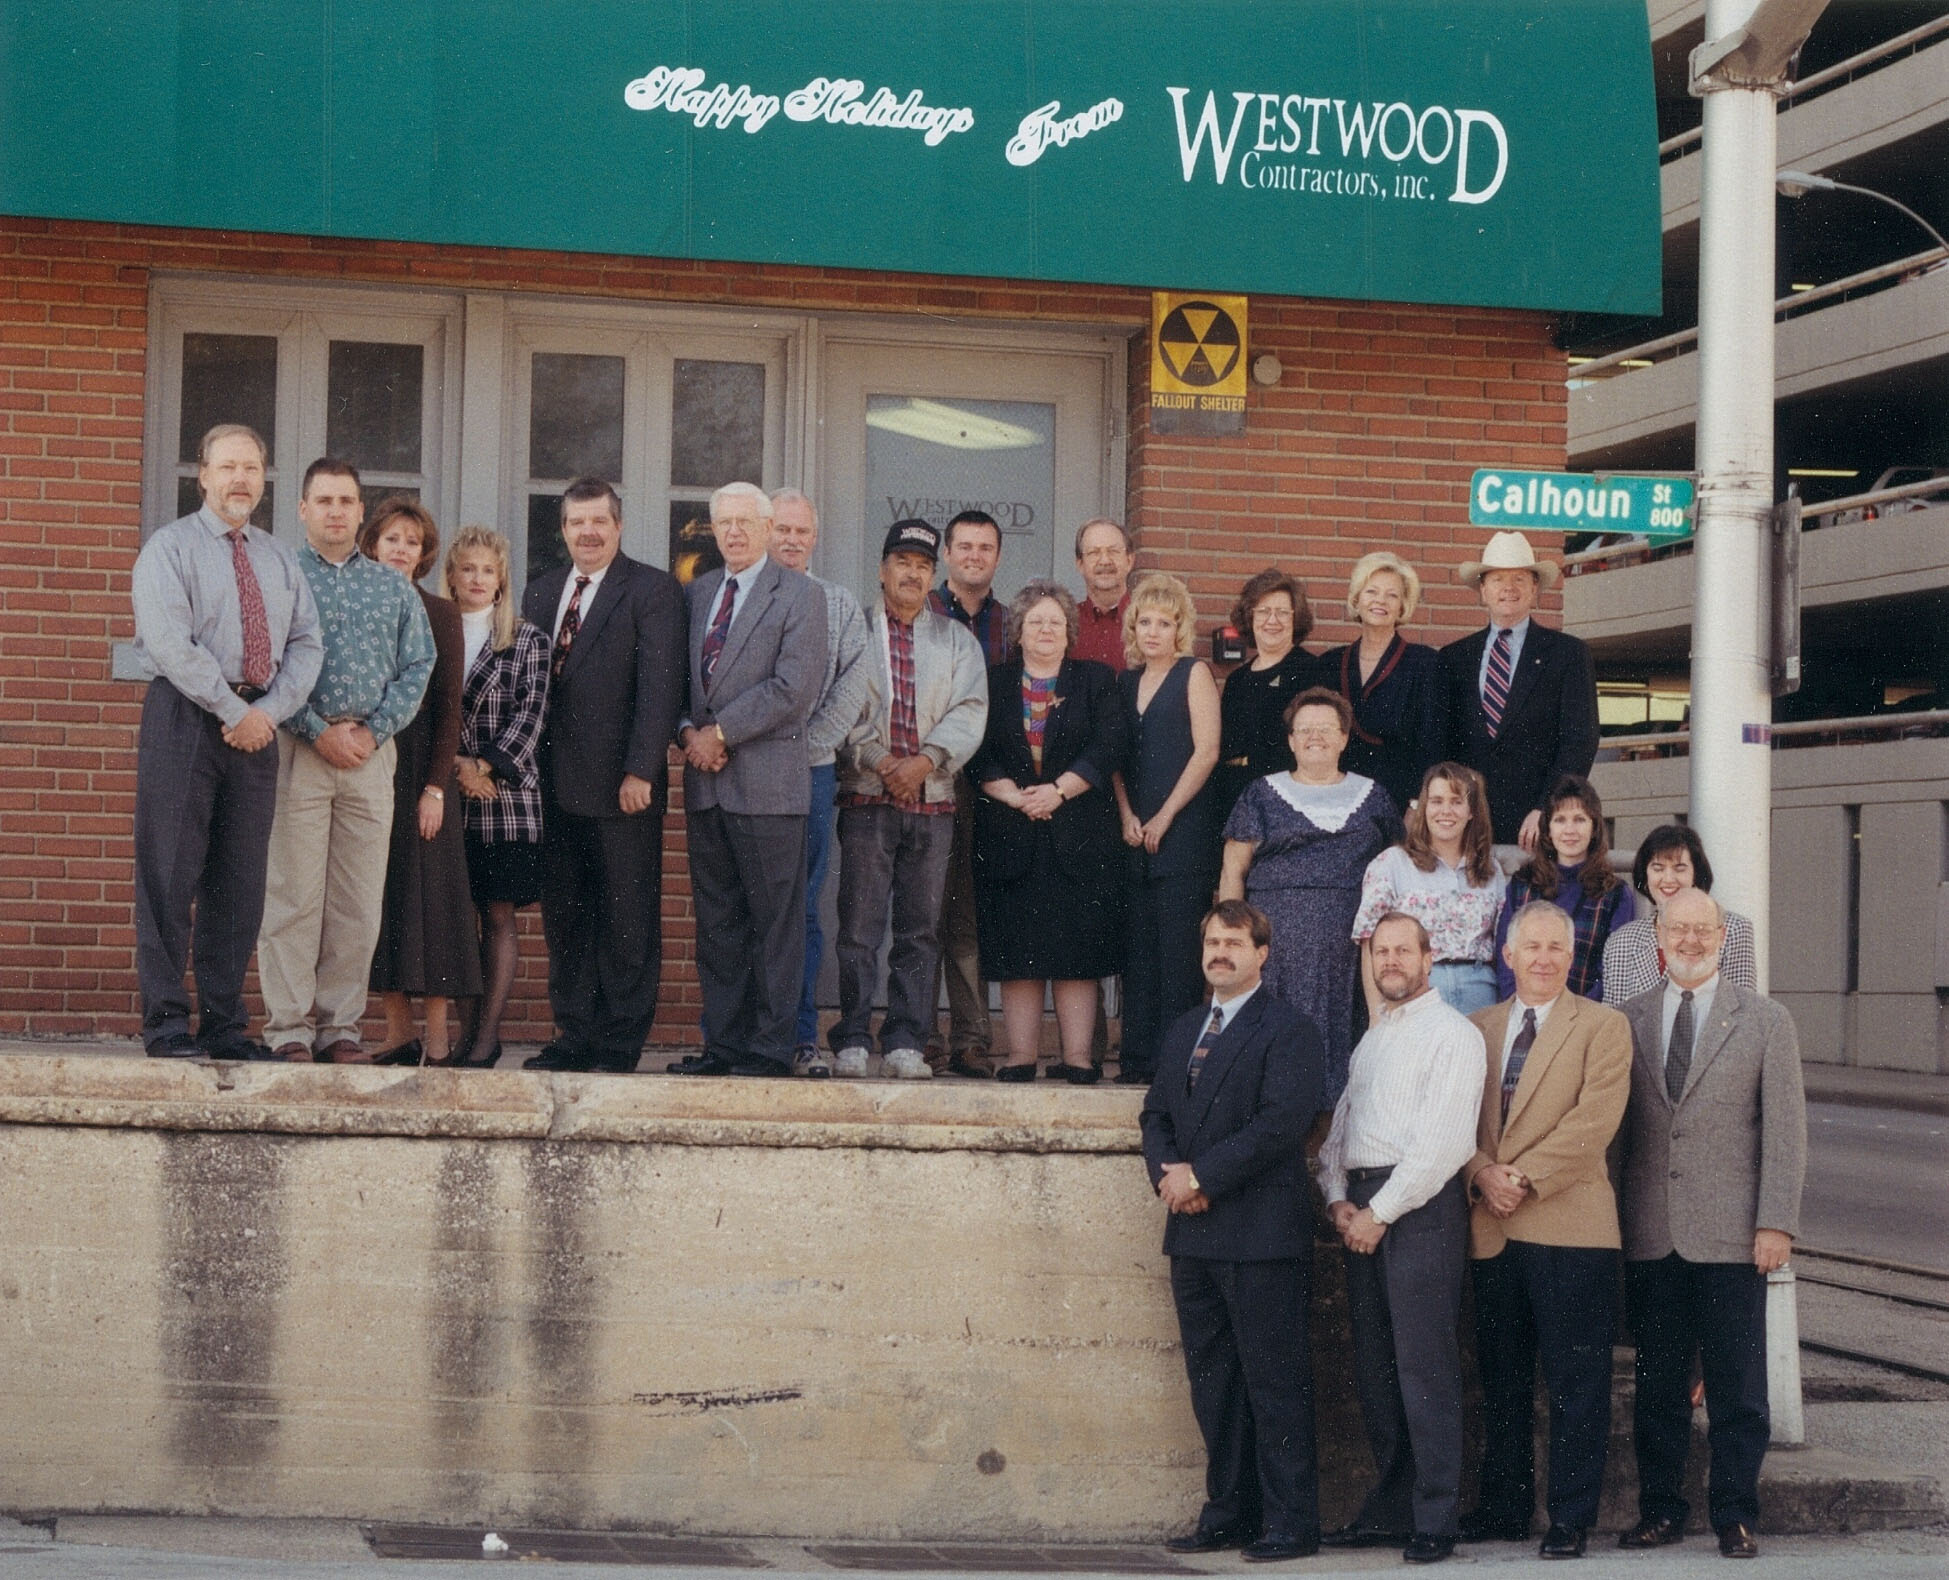 Old Westwood Contractors office on Calhoun Street (Fort Worth, TX) 1998.